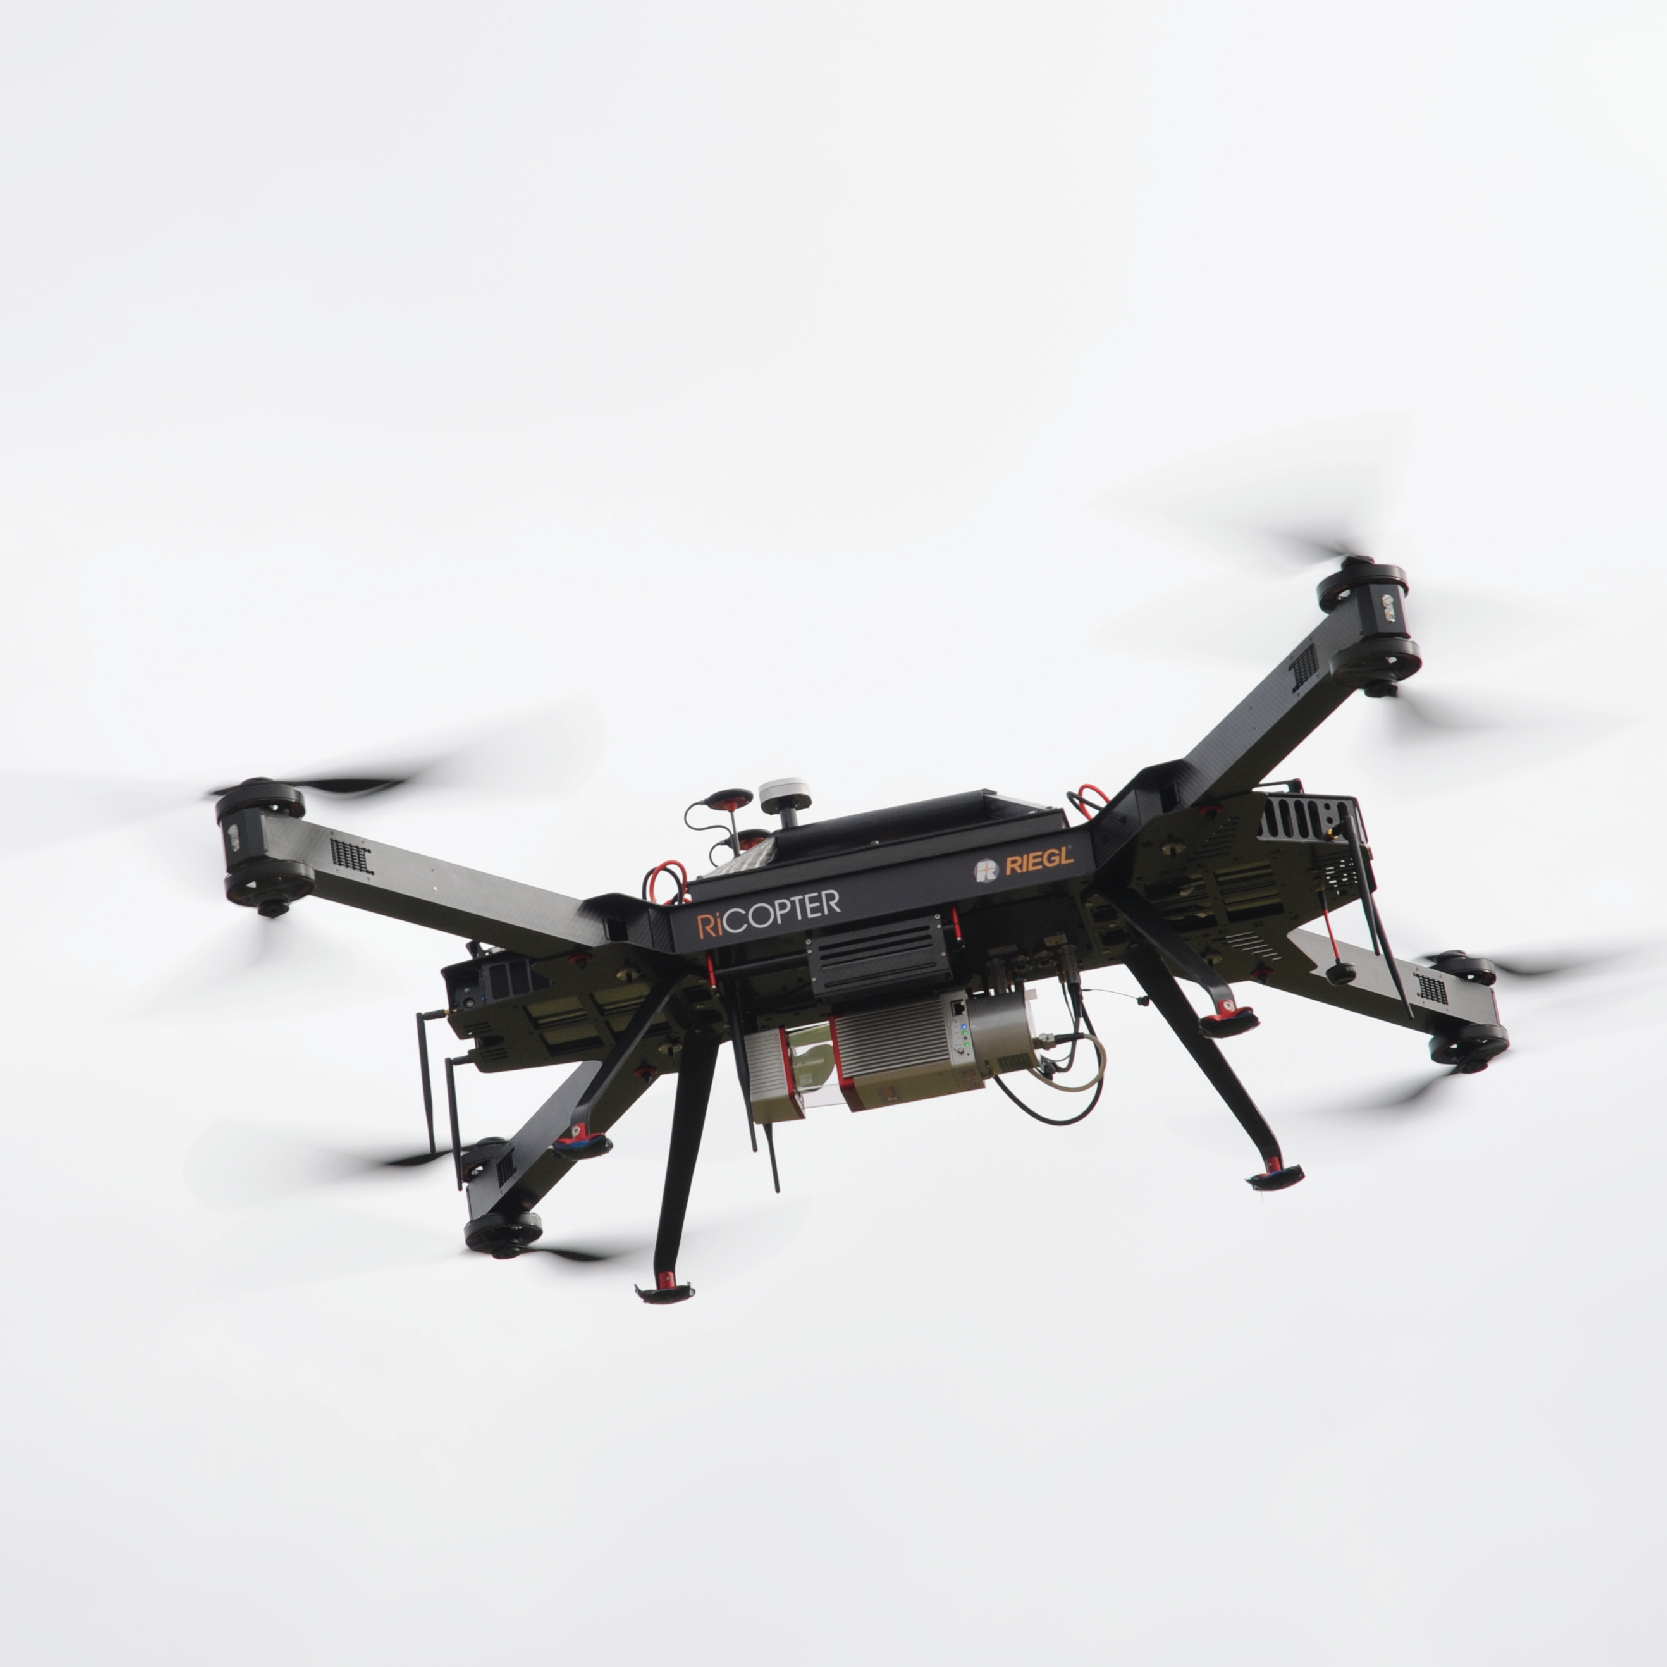 Riegl Ricopter-01